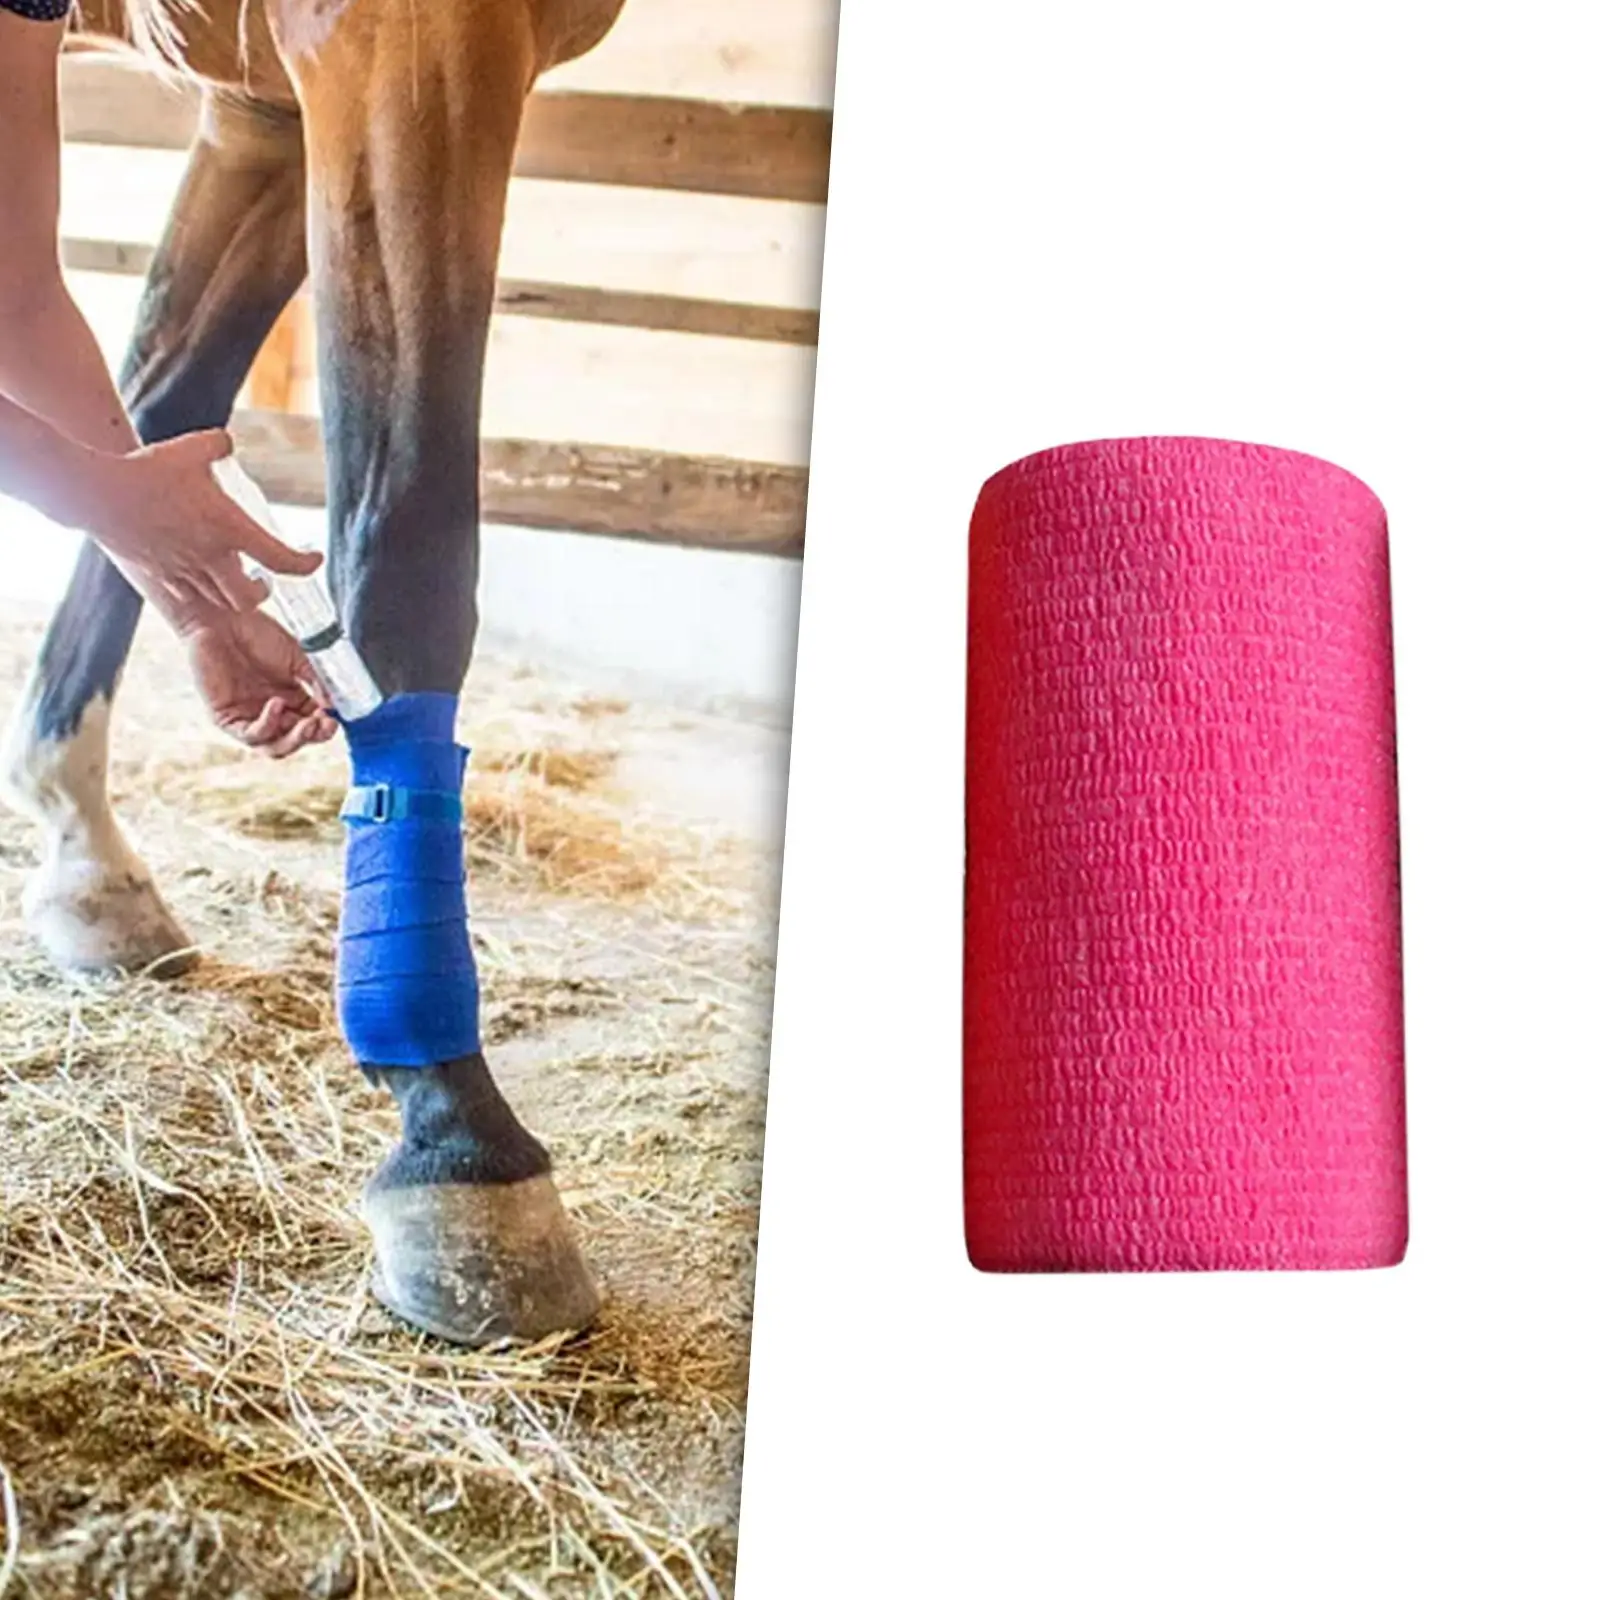 2x for Horses Athletic Tape 4 Inch X 5 Yards Non Woven Elastic Horse Leg Wrap Self Adherent Wrap for Pet Cats Hand Wrist Elbow